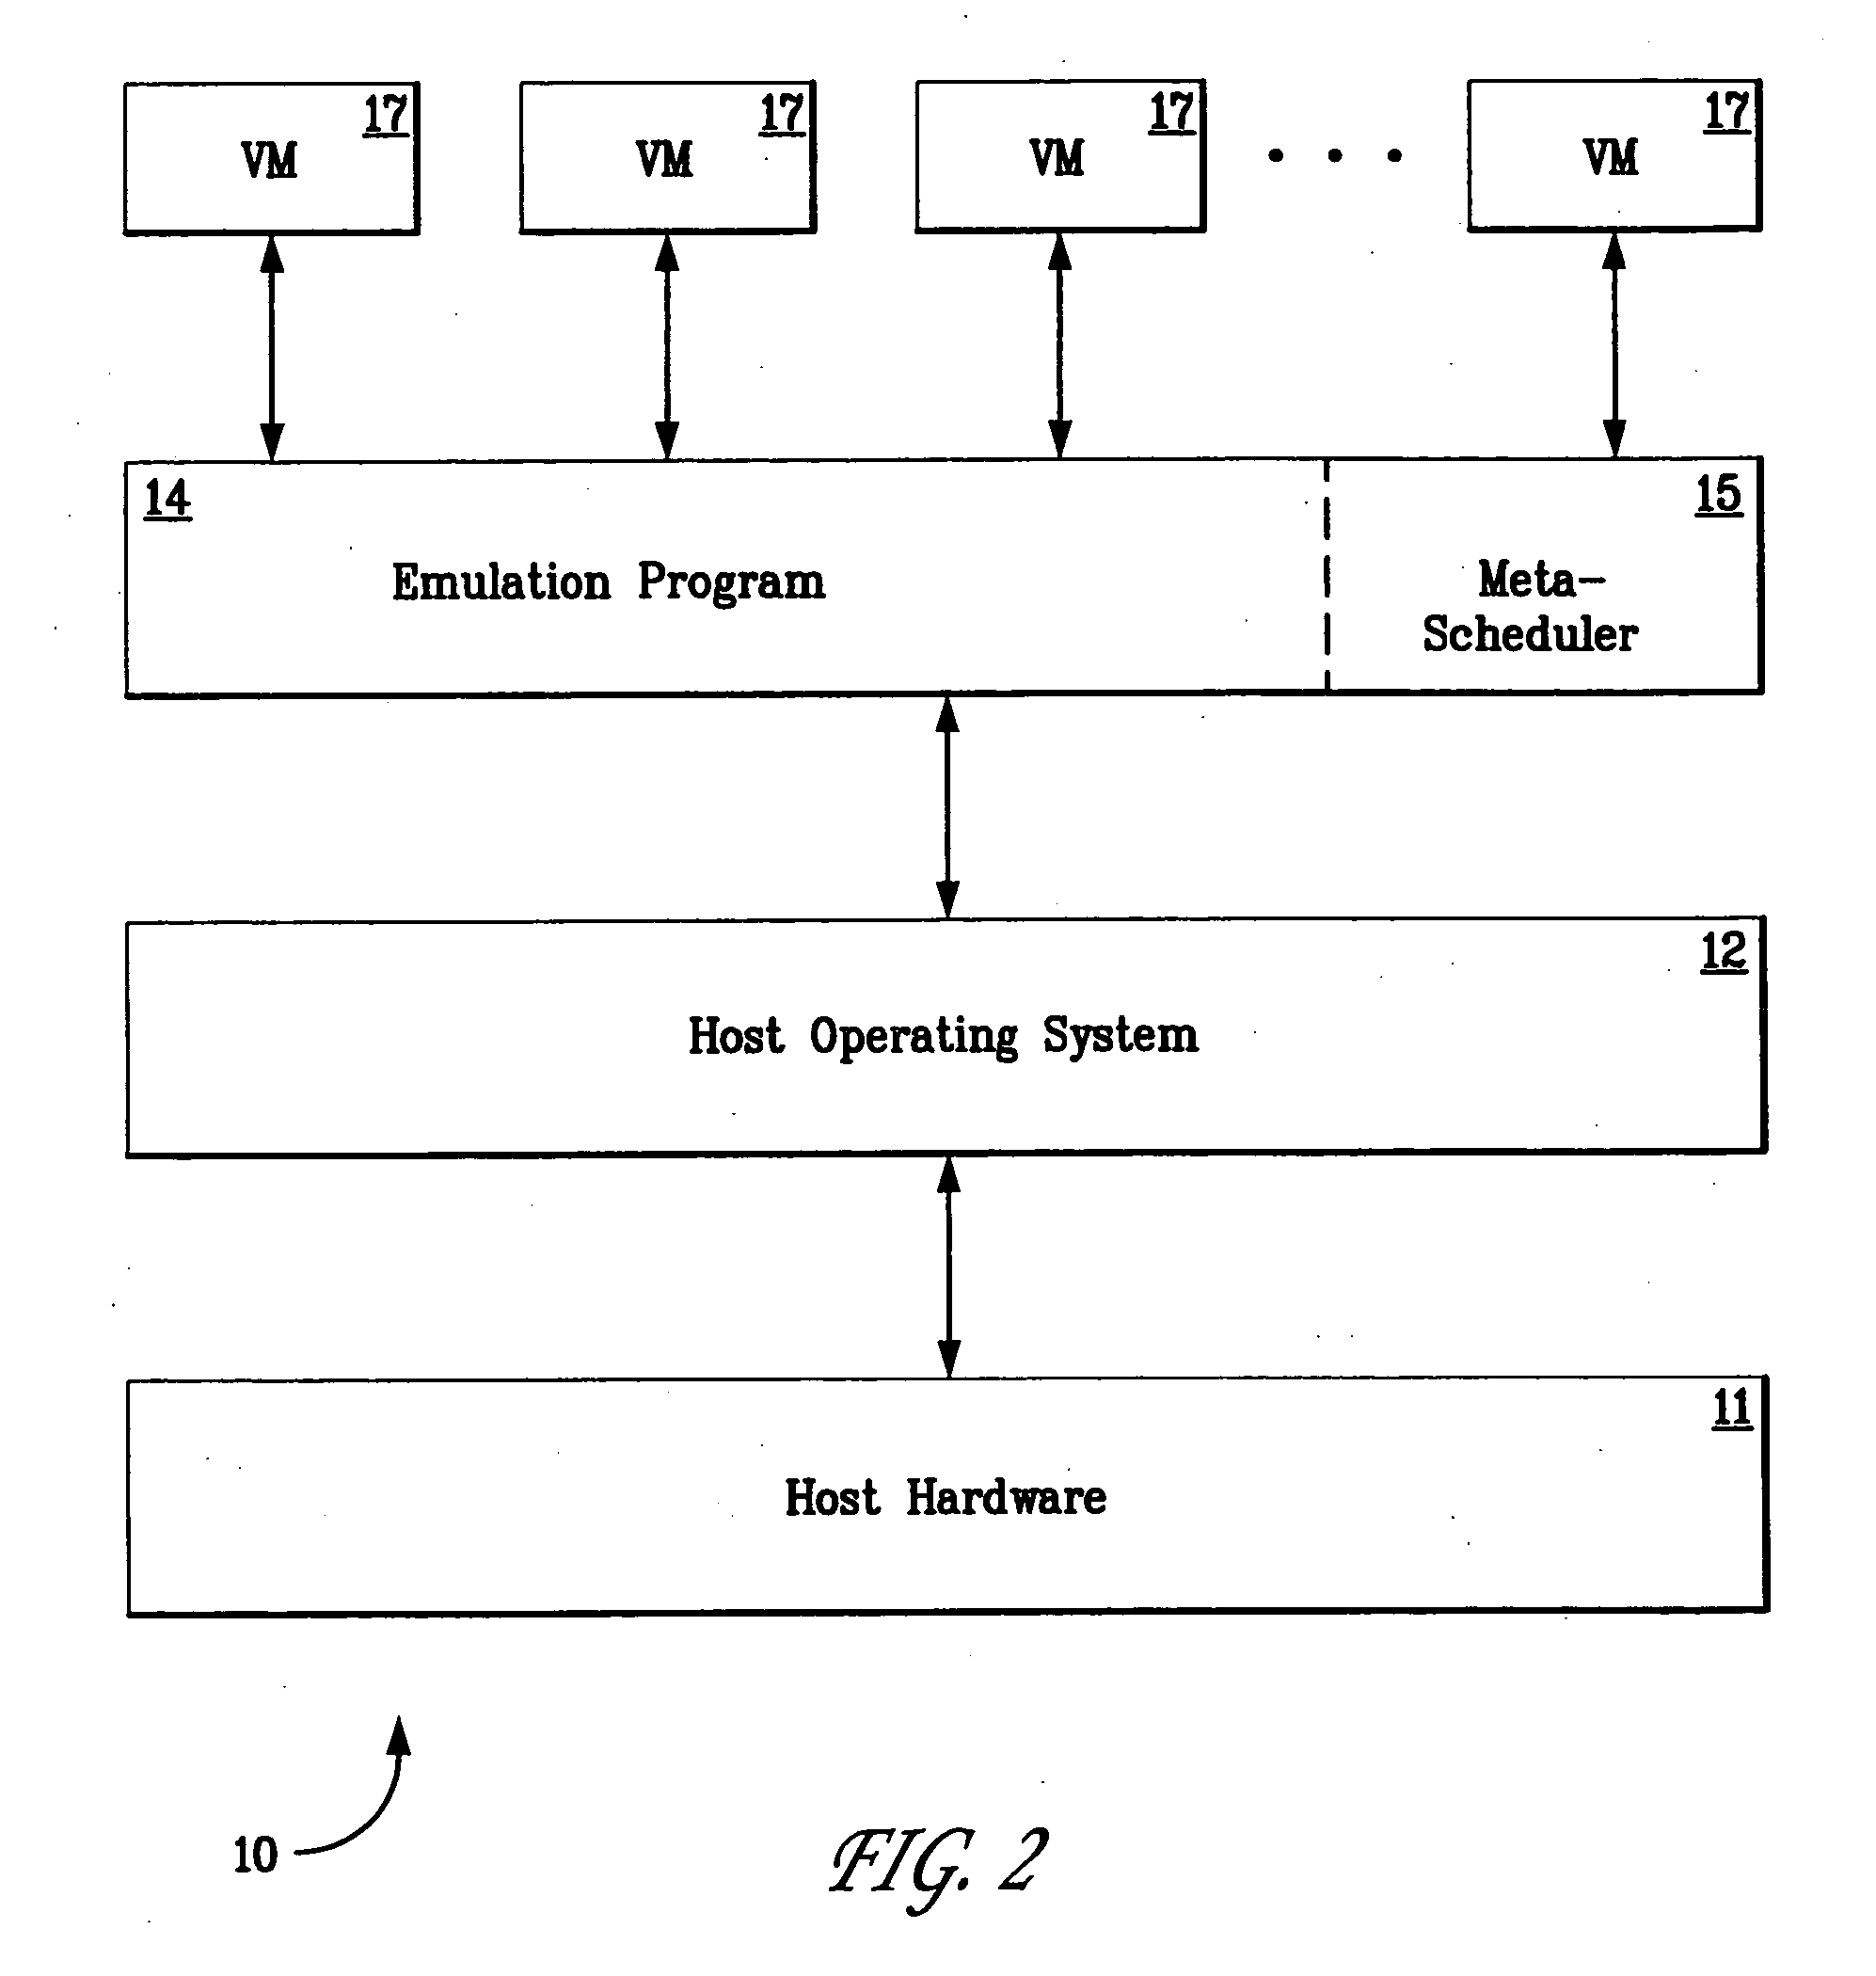 Allocation of processor resources in an emulated computing environment